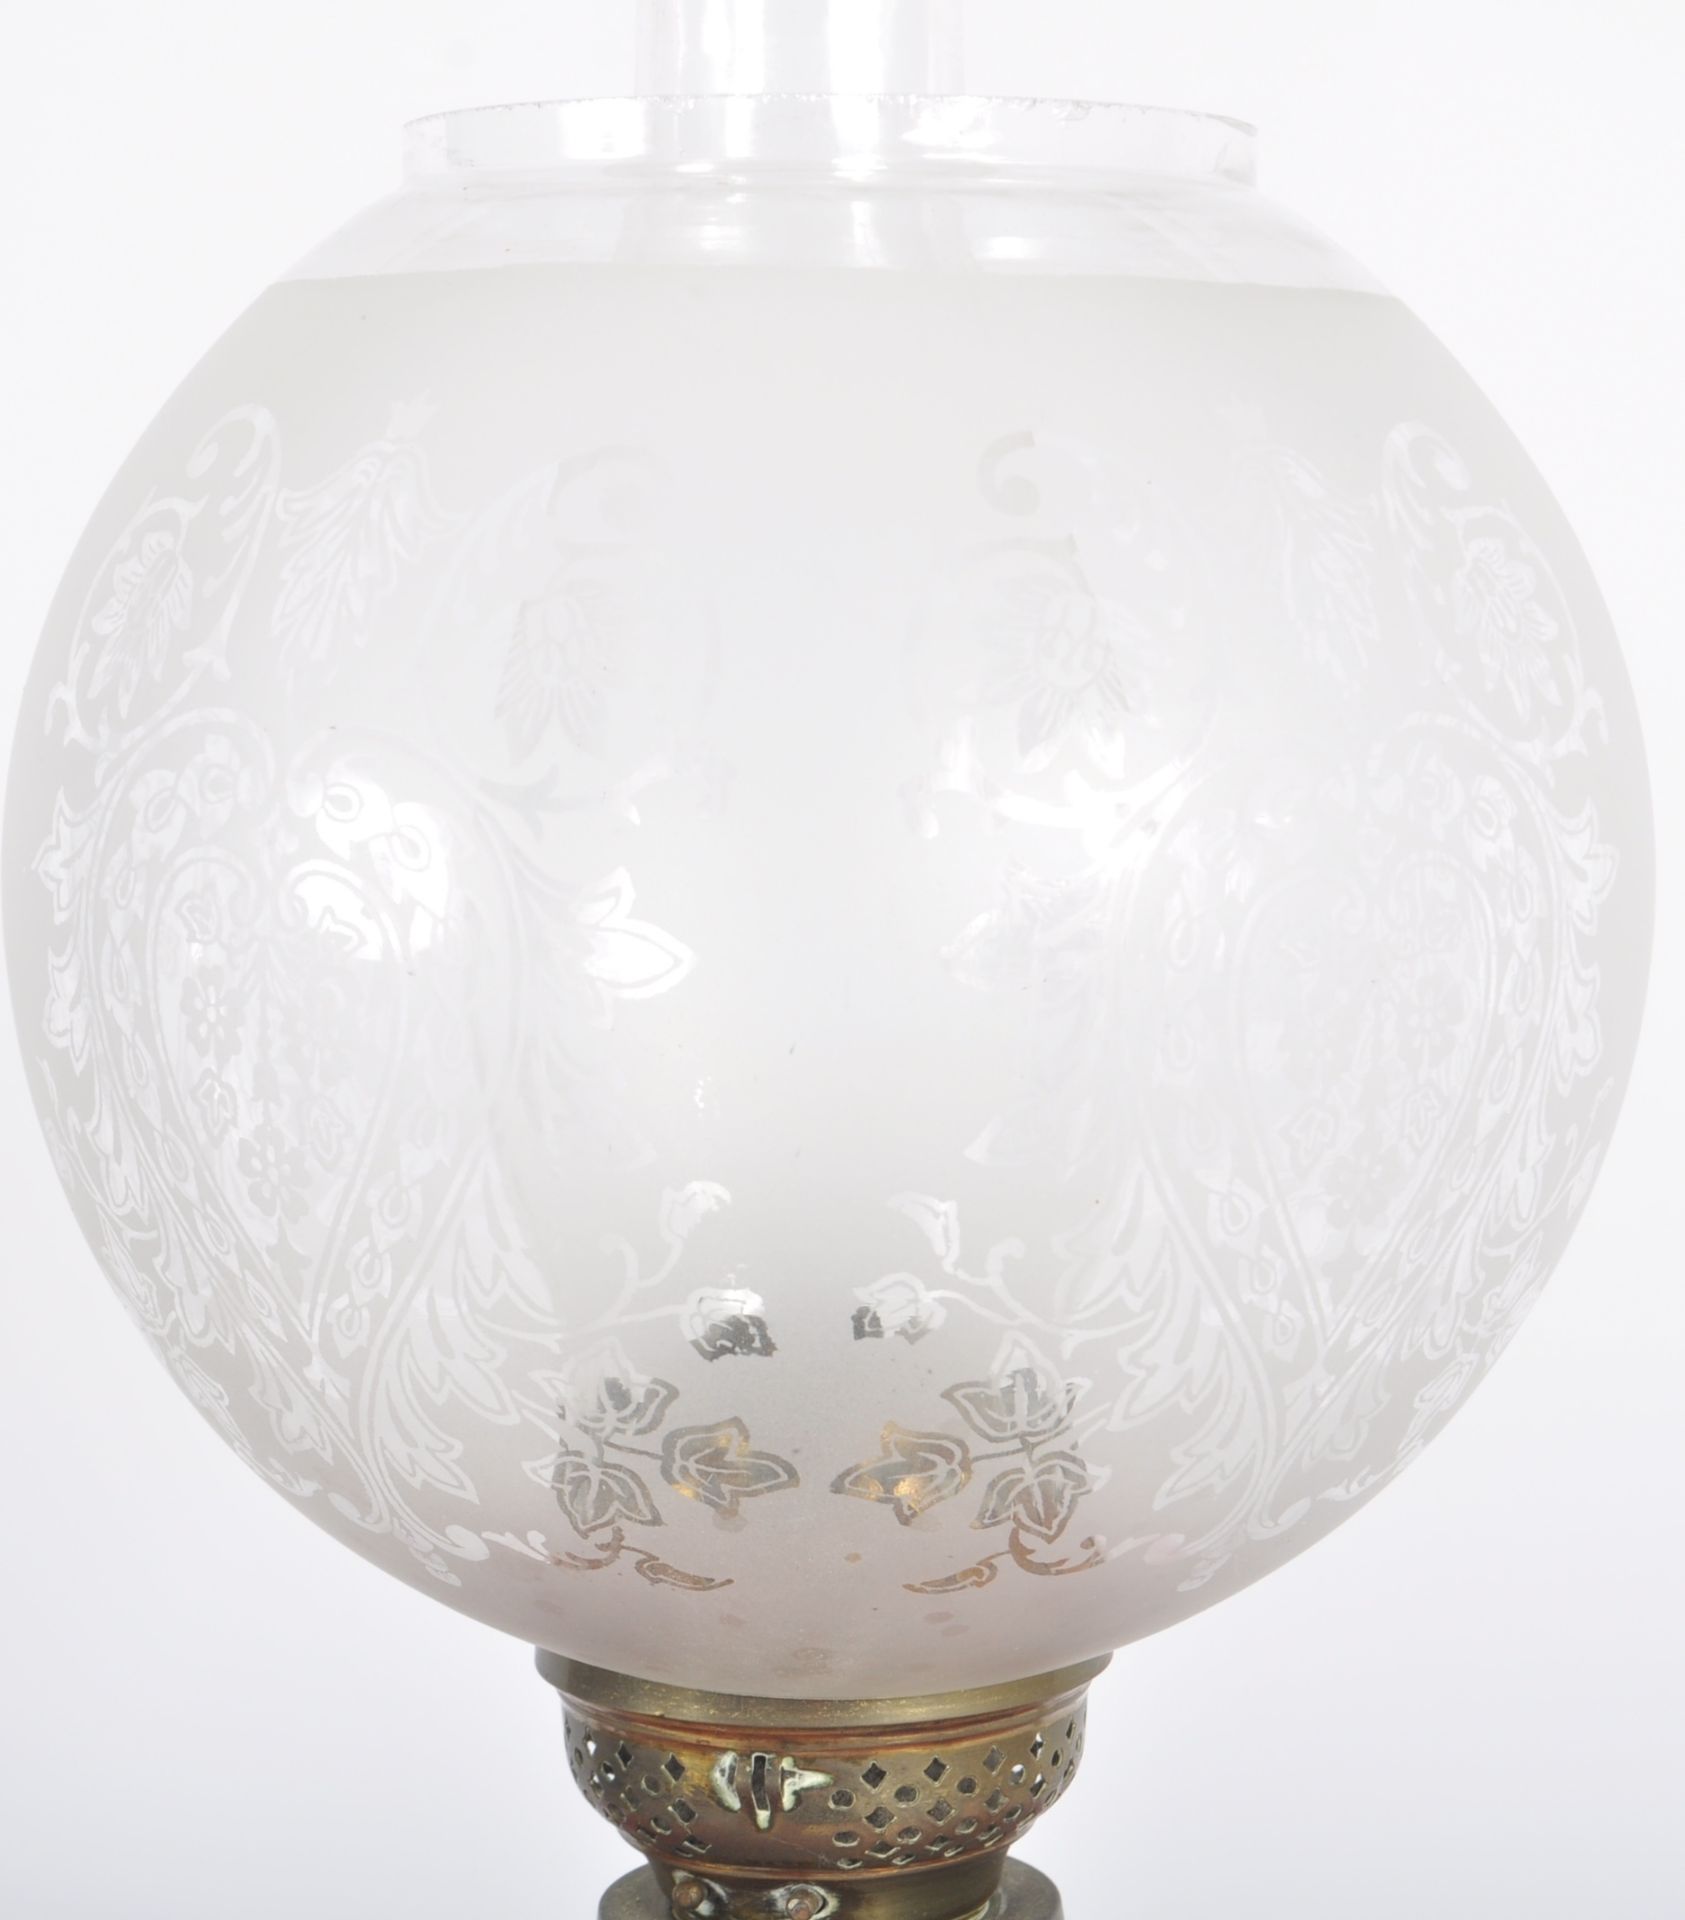 19TH CENTURY VICTORIAN NEOCLASSICAL OIL LAMP - Image 5 of 8